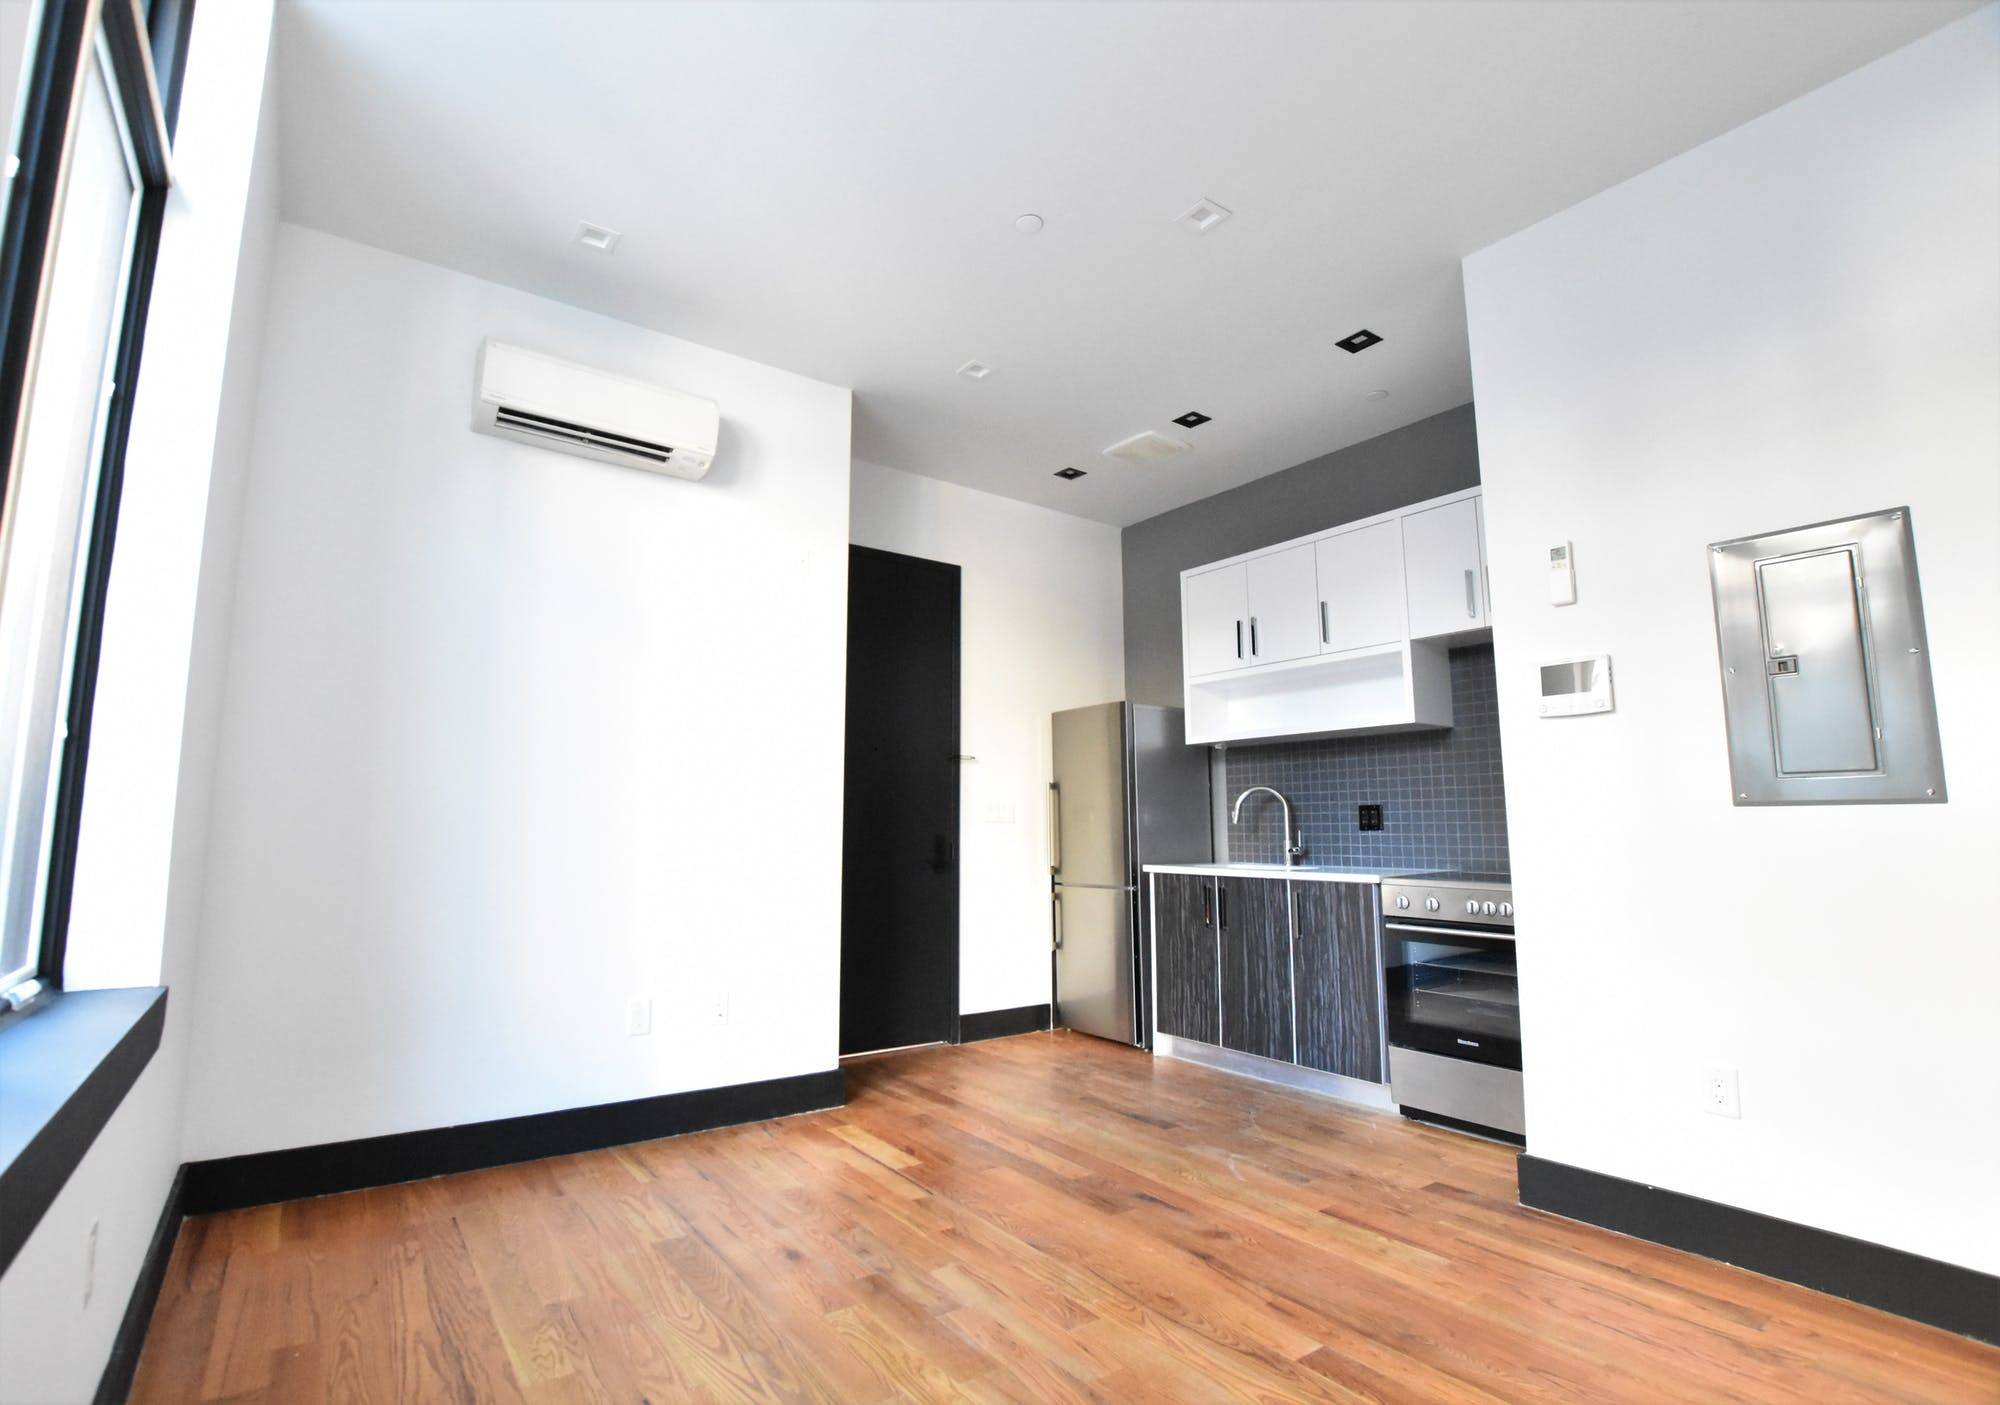 No Fee. Gut Renovated Duplex Apartment Come view this one of a kind Duplex 1 bed, 1.